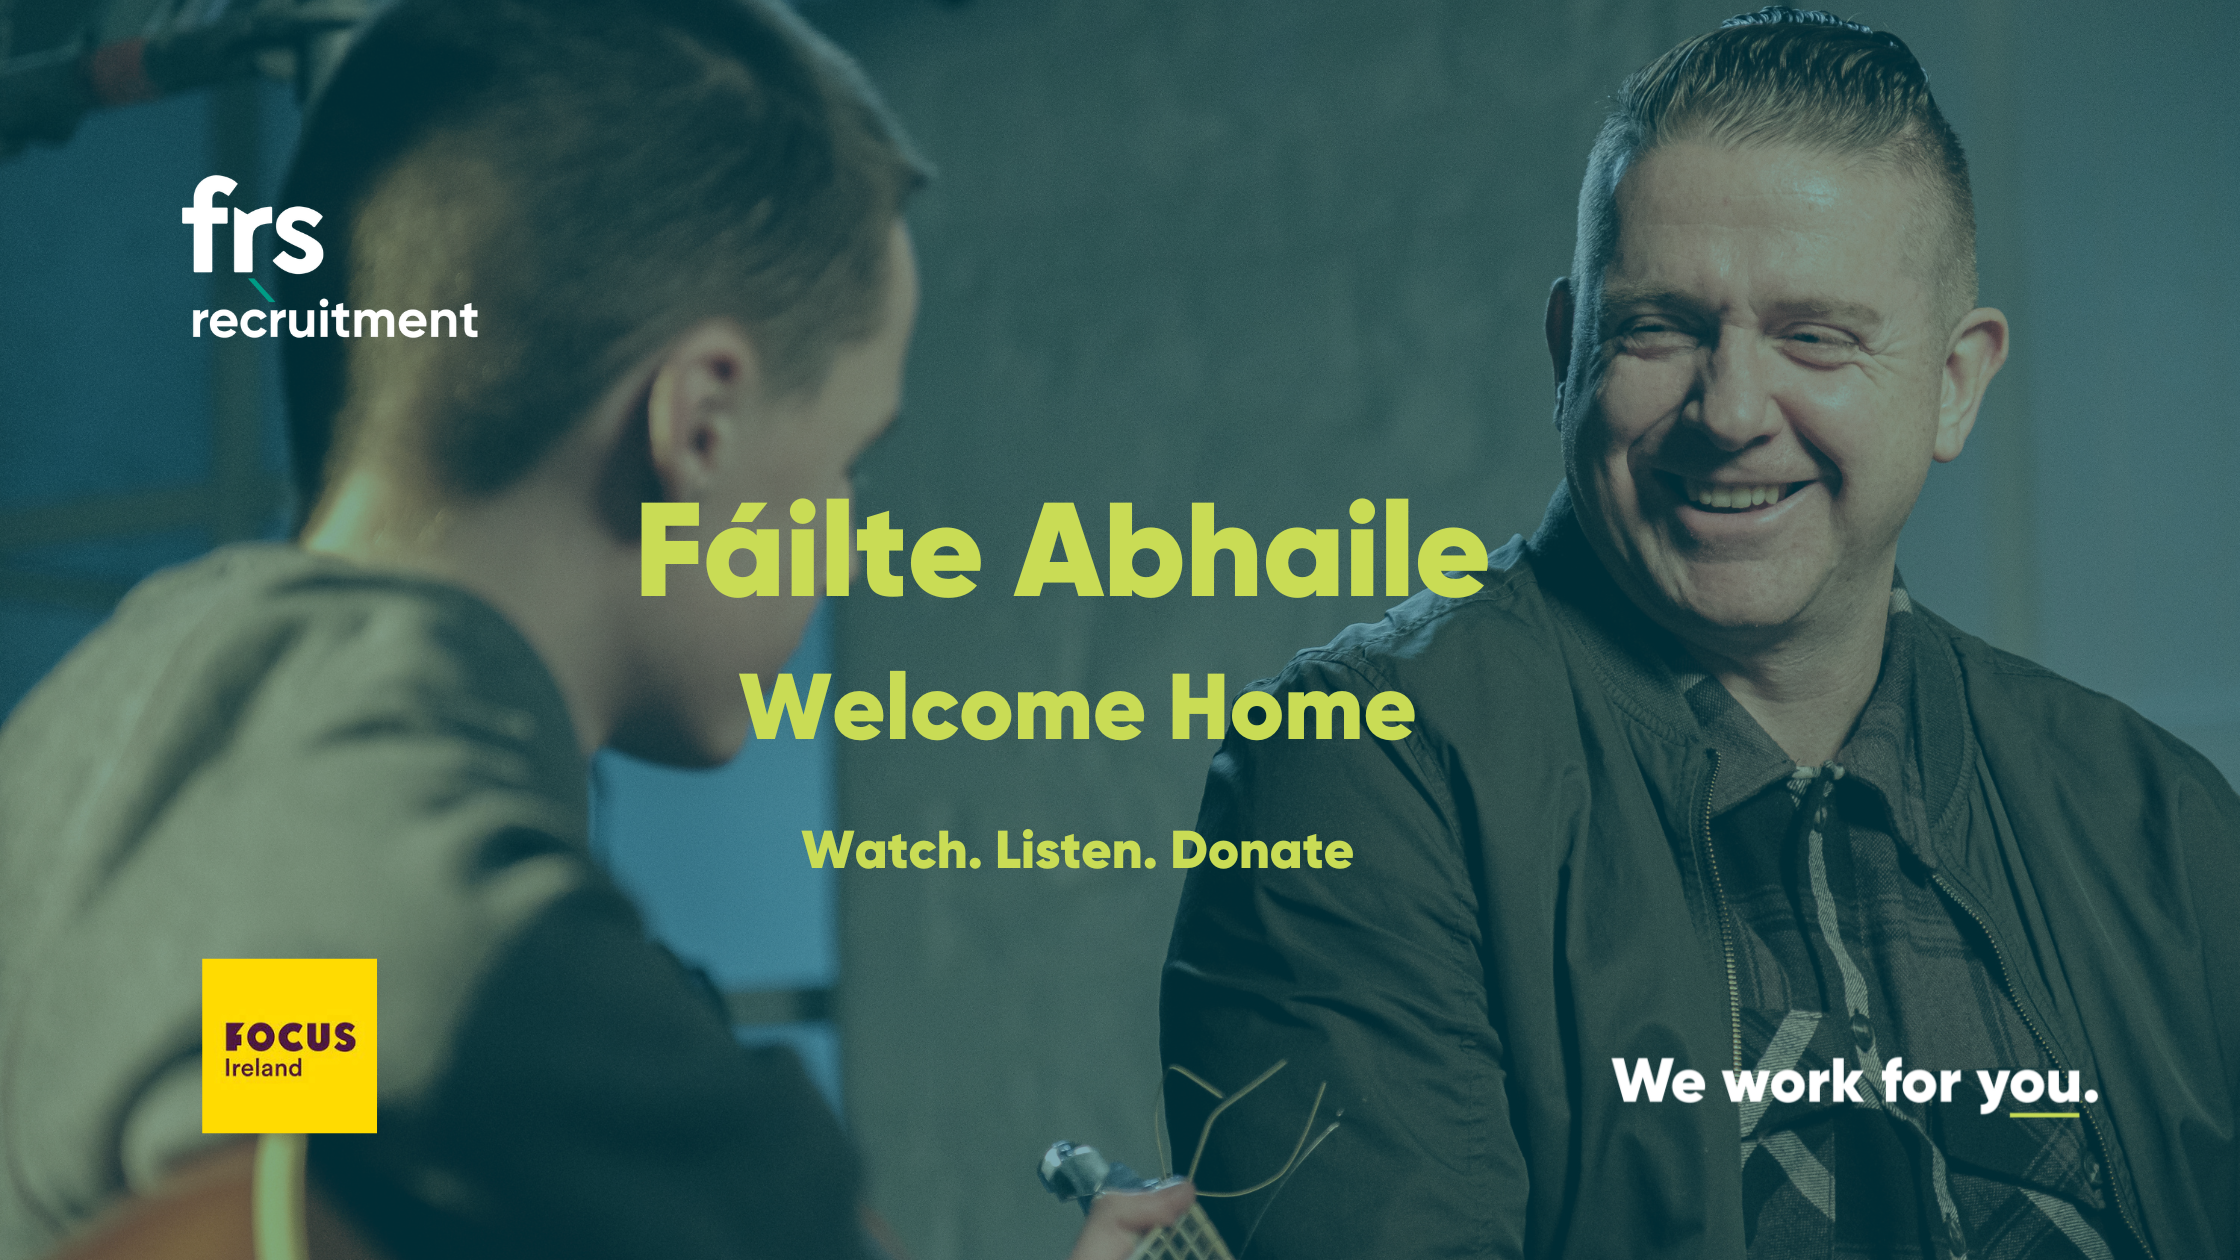 FRS Recruitment support Damien Dempsey’s new Christmas song ‘Fáilte Abhaile'